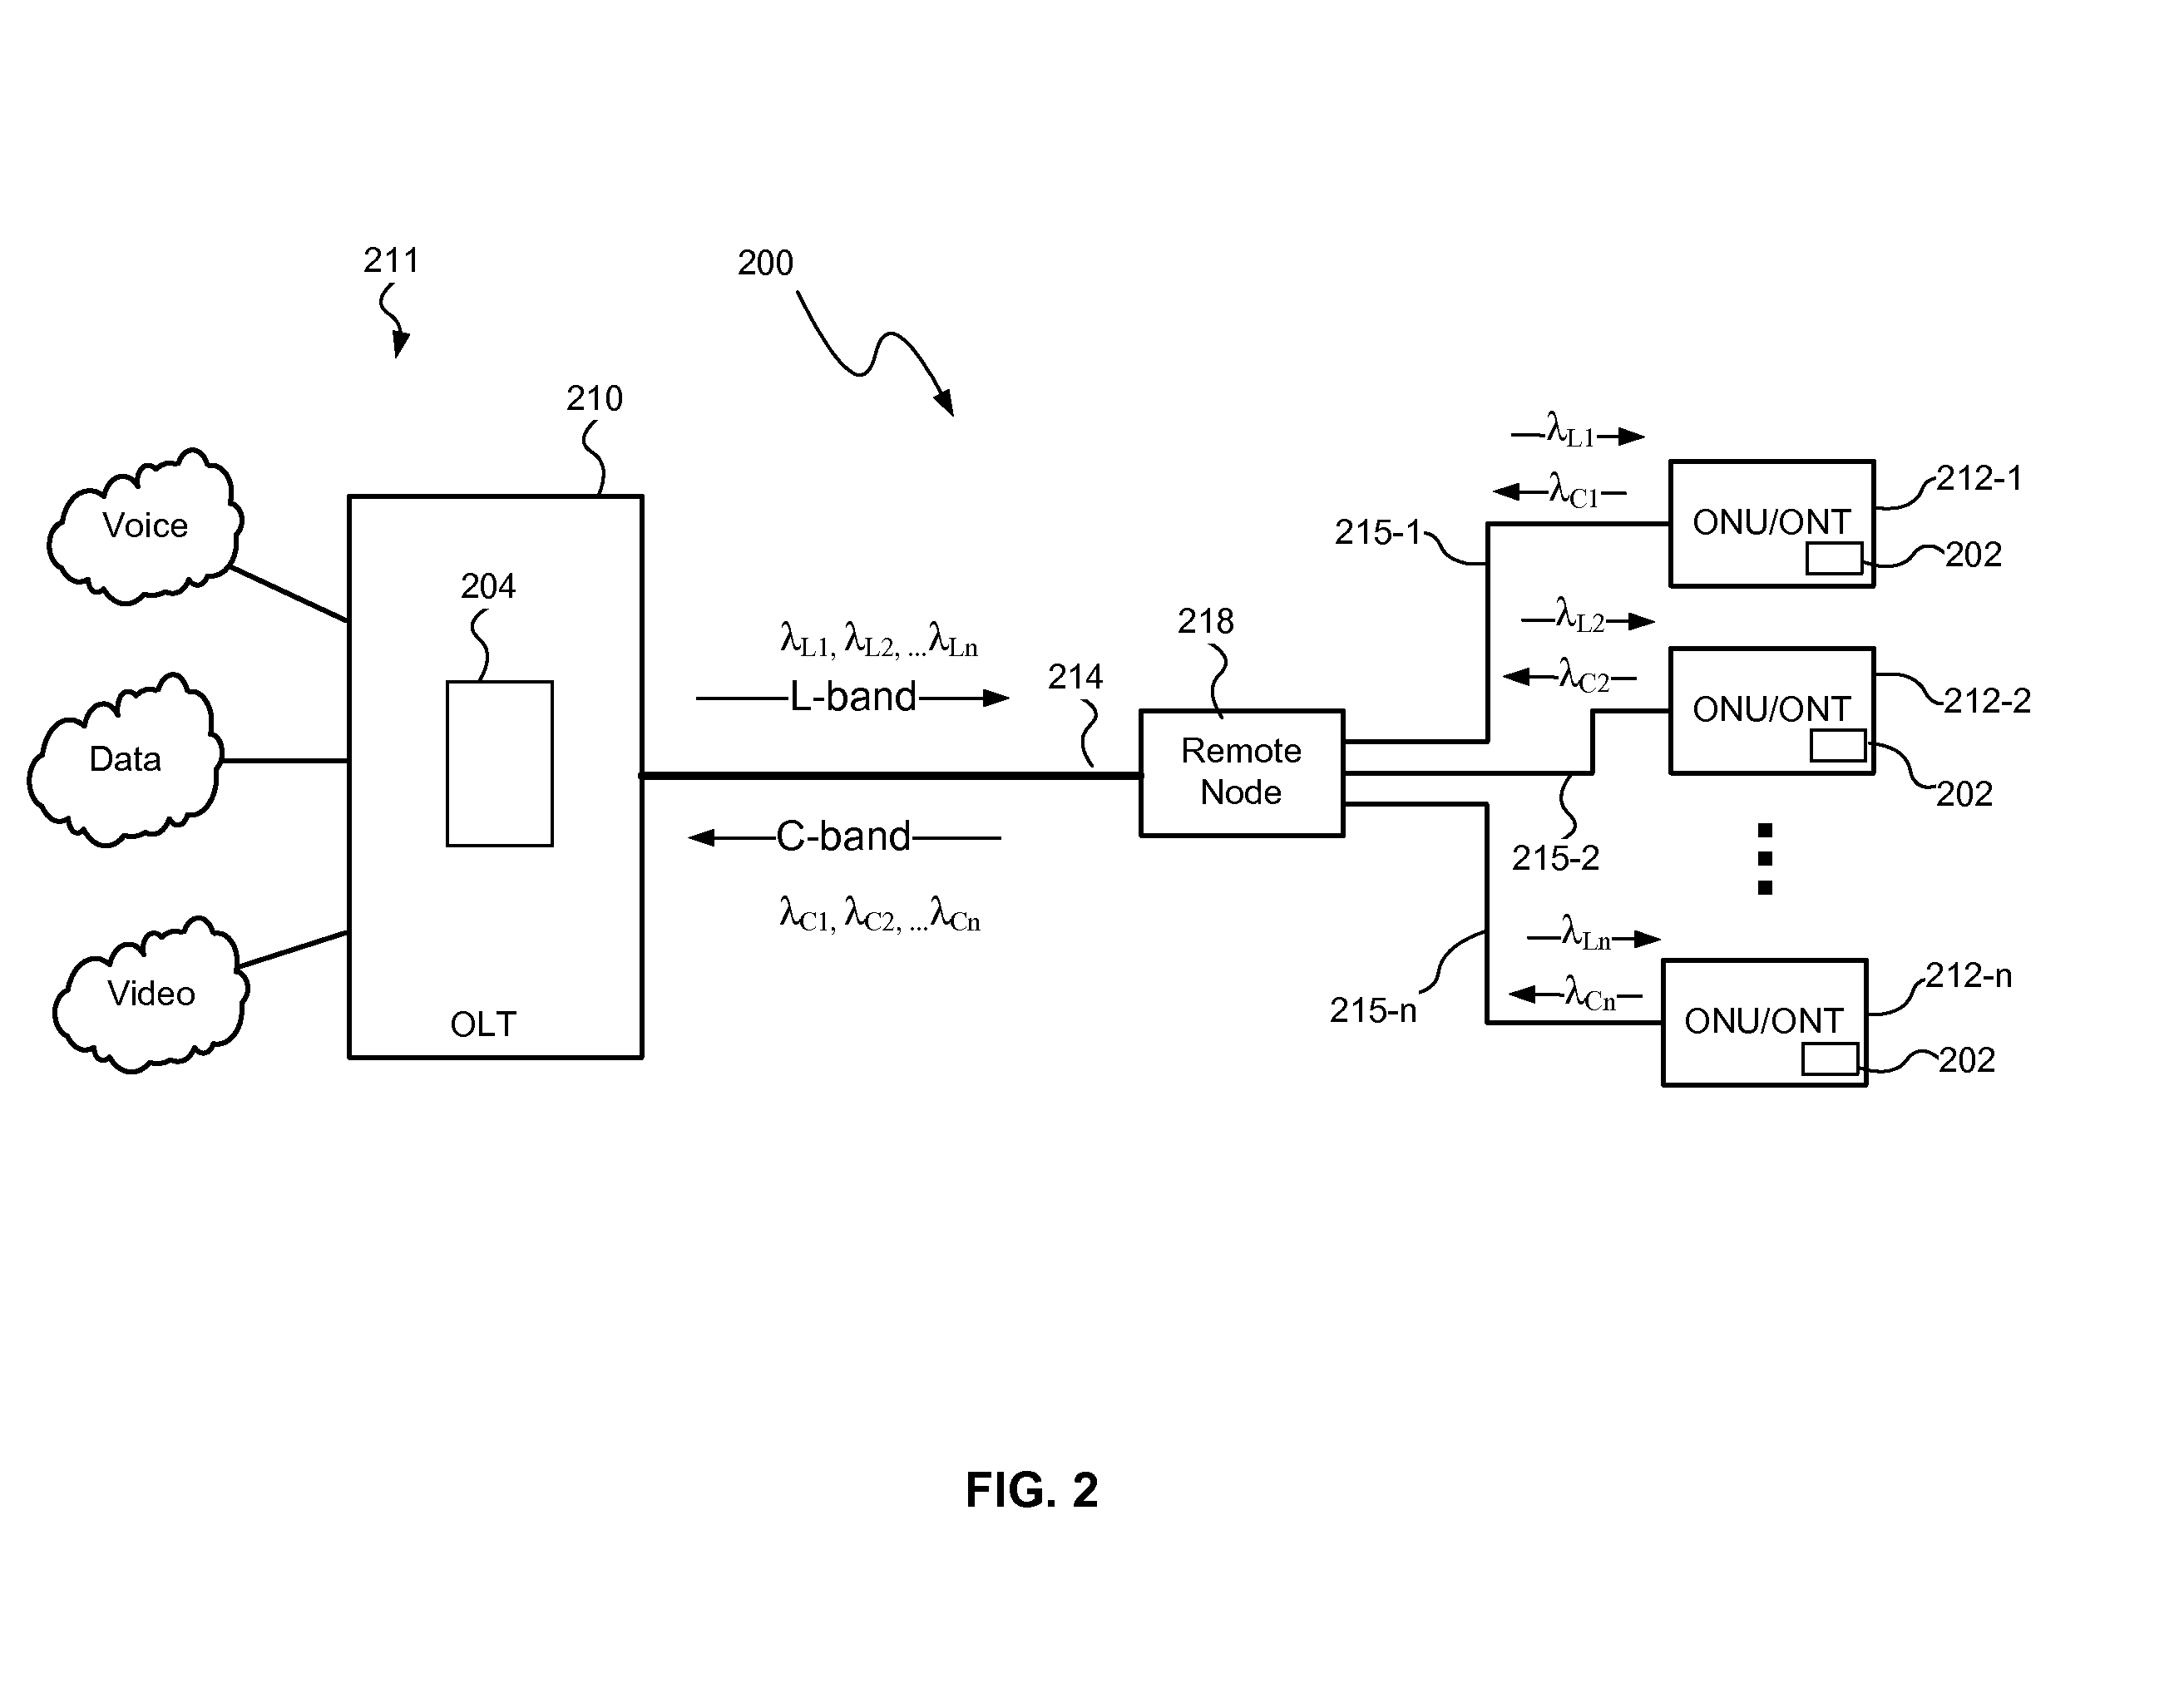 Laser array mux assembly with external reflector for providing a selected wavelength or multiplexed wavelengths